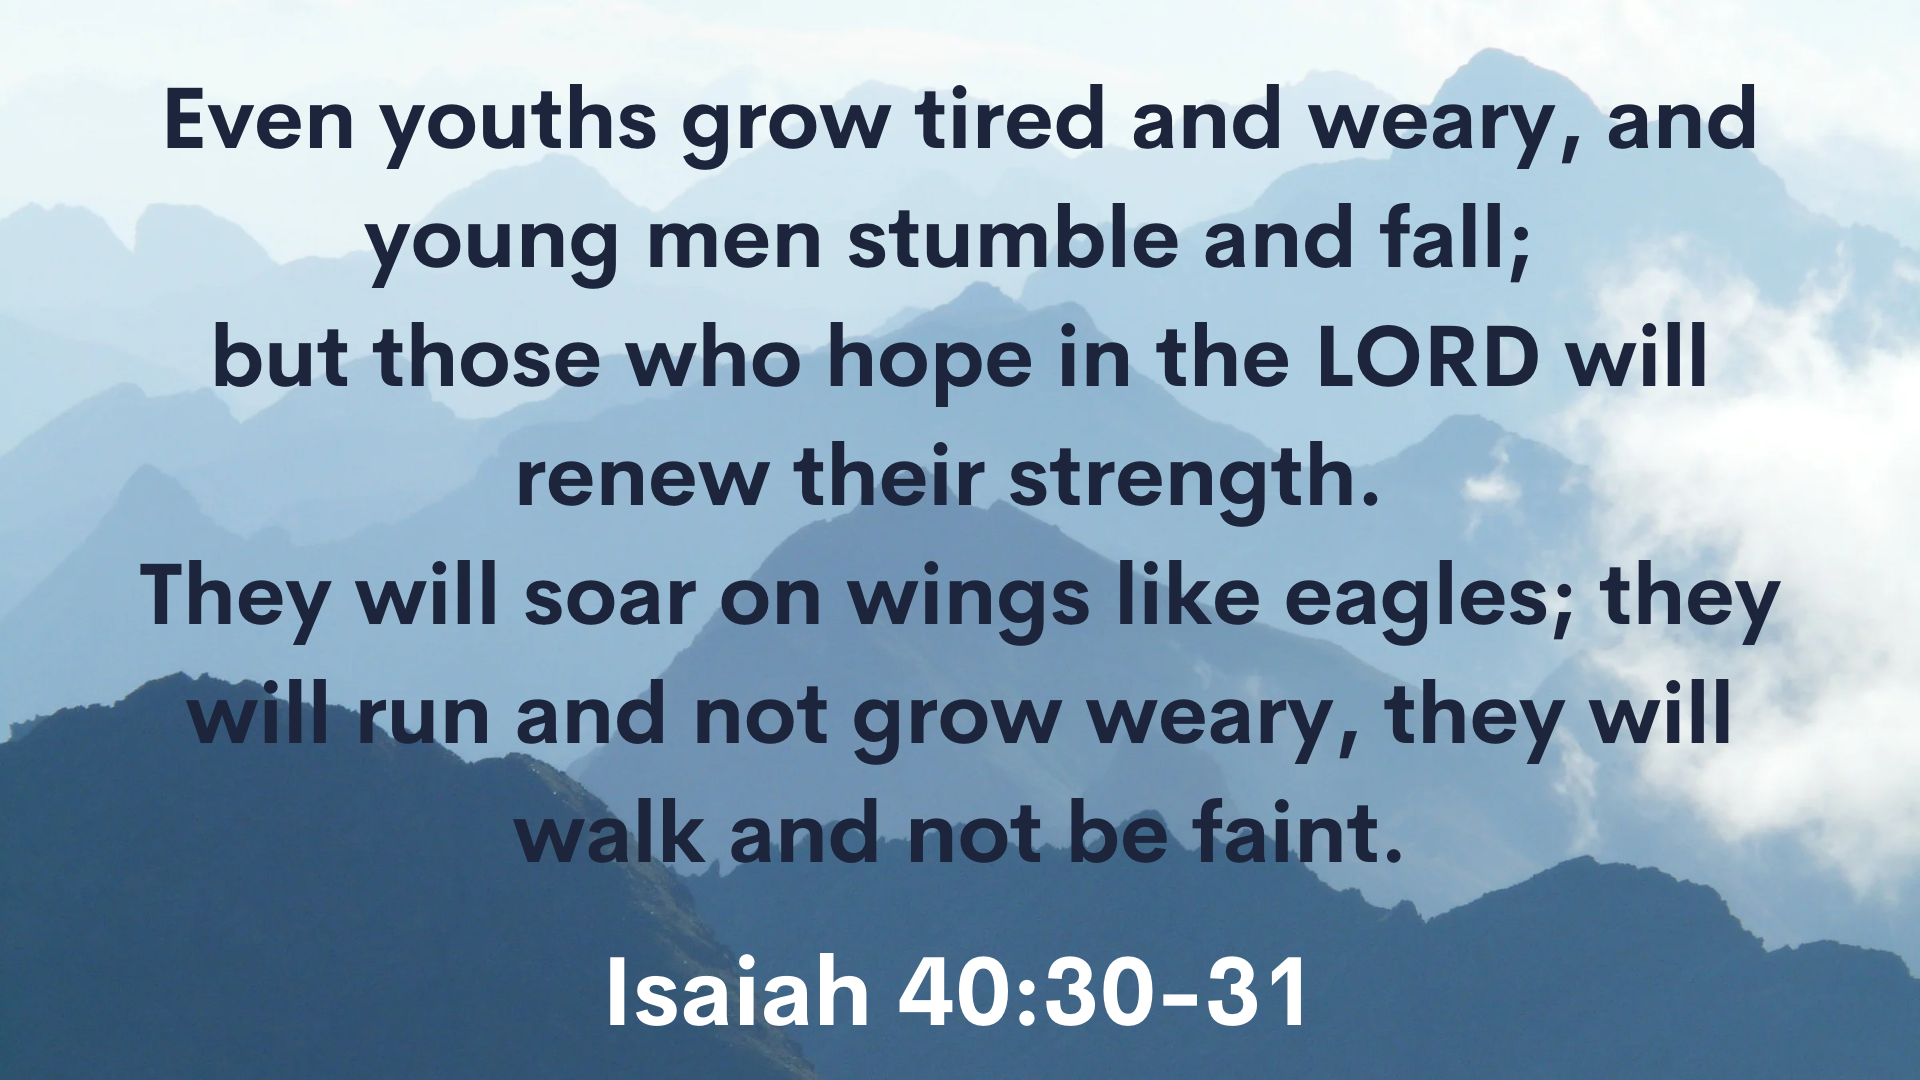 Isaiah 40:25-31 – – How does the Lord strengthen His people?